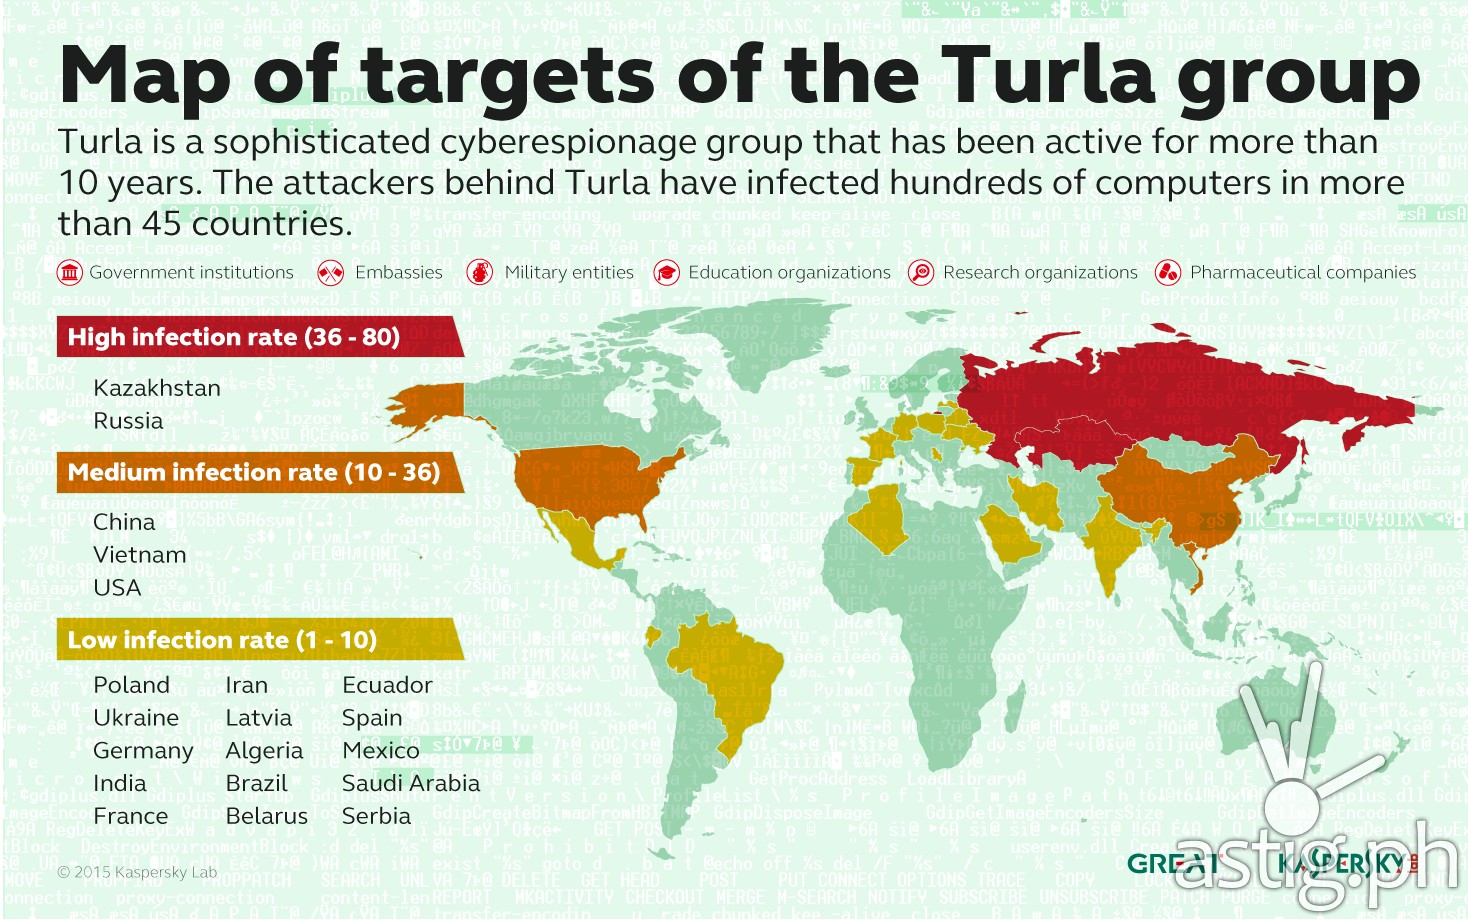 KL_Turla_Map_of_Targets